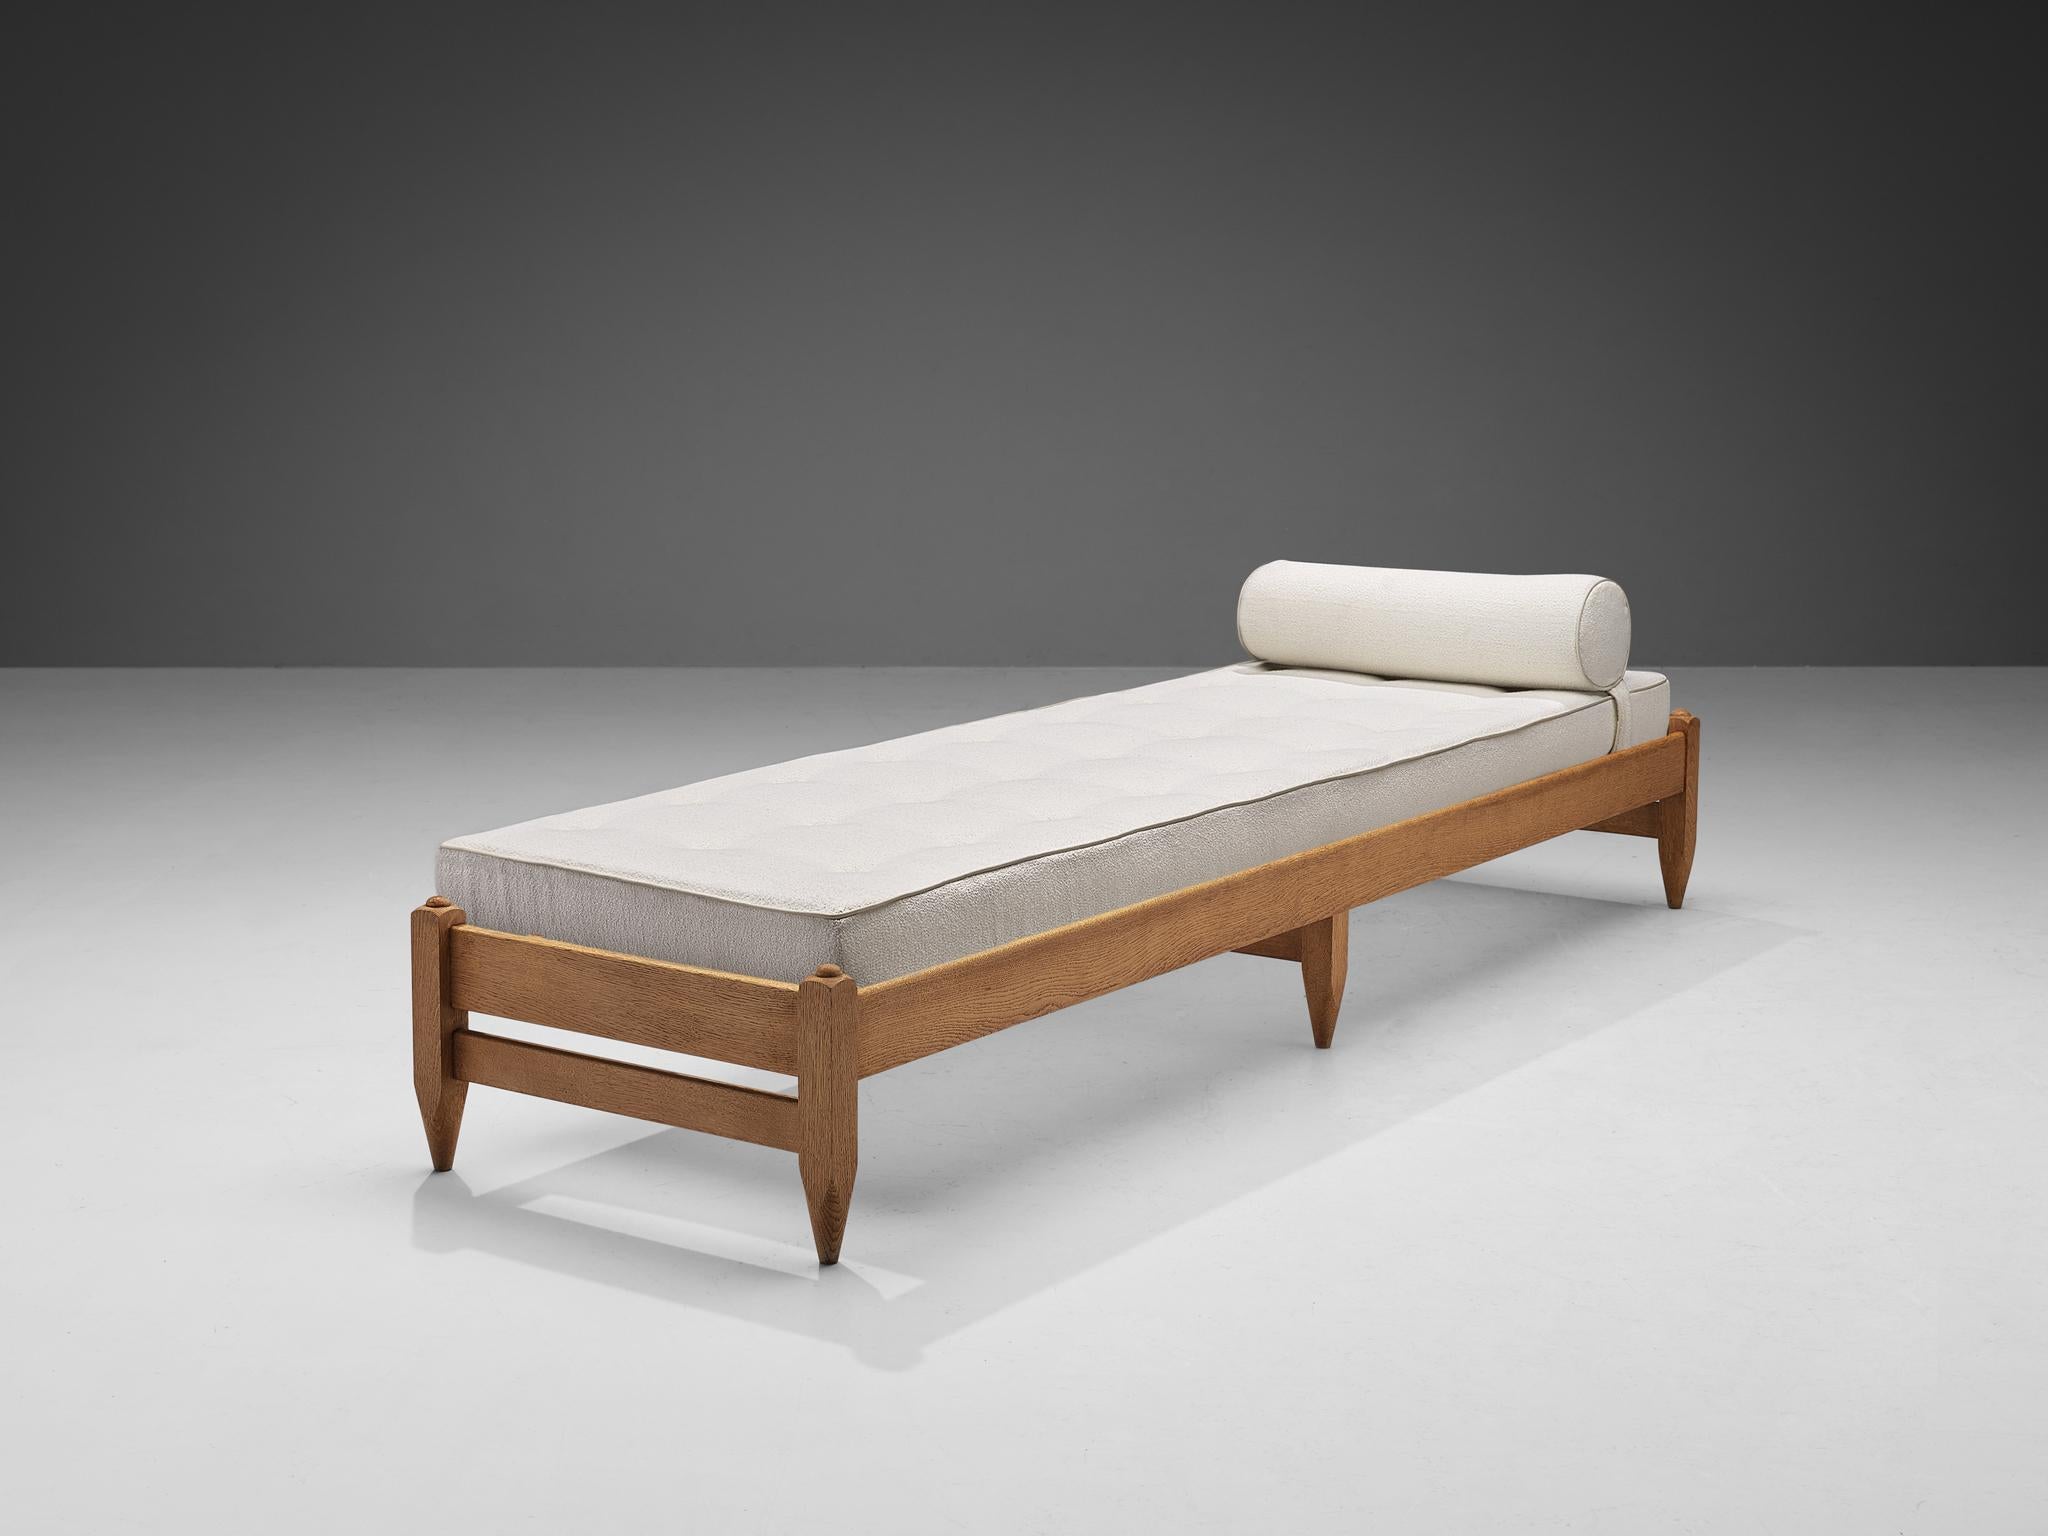 Guillerme et Chambron for Votre Maison, daybed, oak, France, 1960s.

Sturdy daybed by Guillerme and Chambron executed in solid oak with the typical characteristic details like the sculpted legs that are placed at the end and in the middle of the